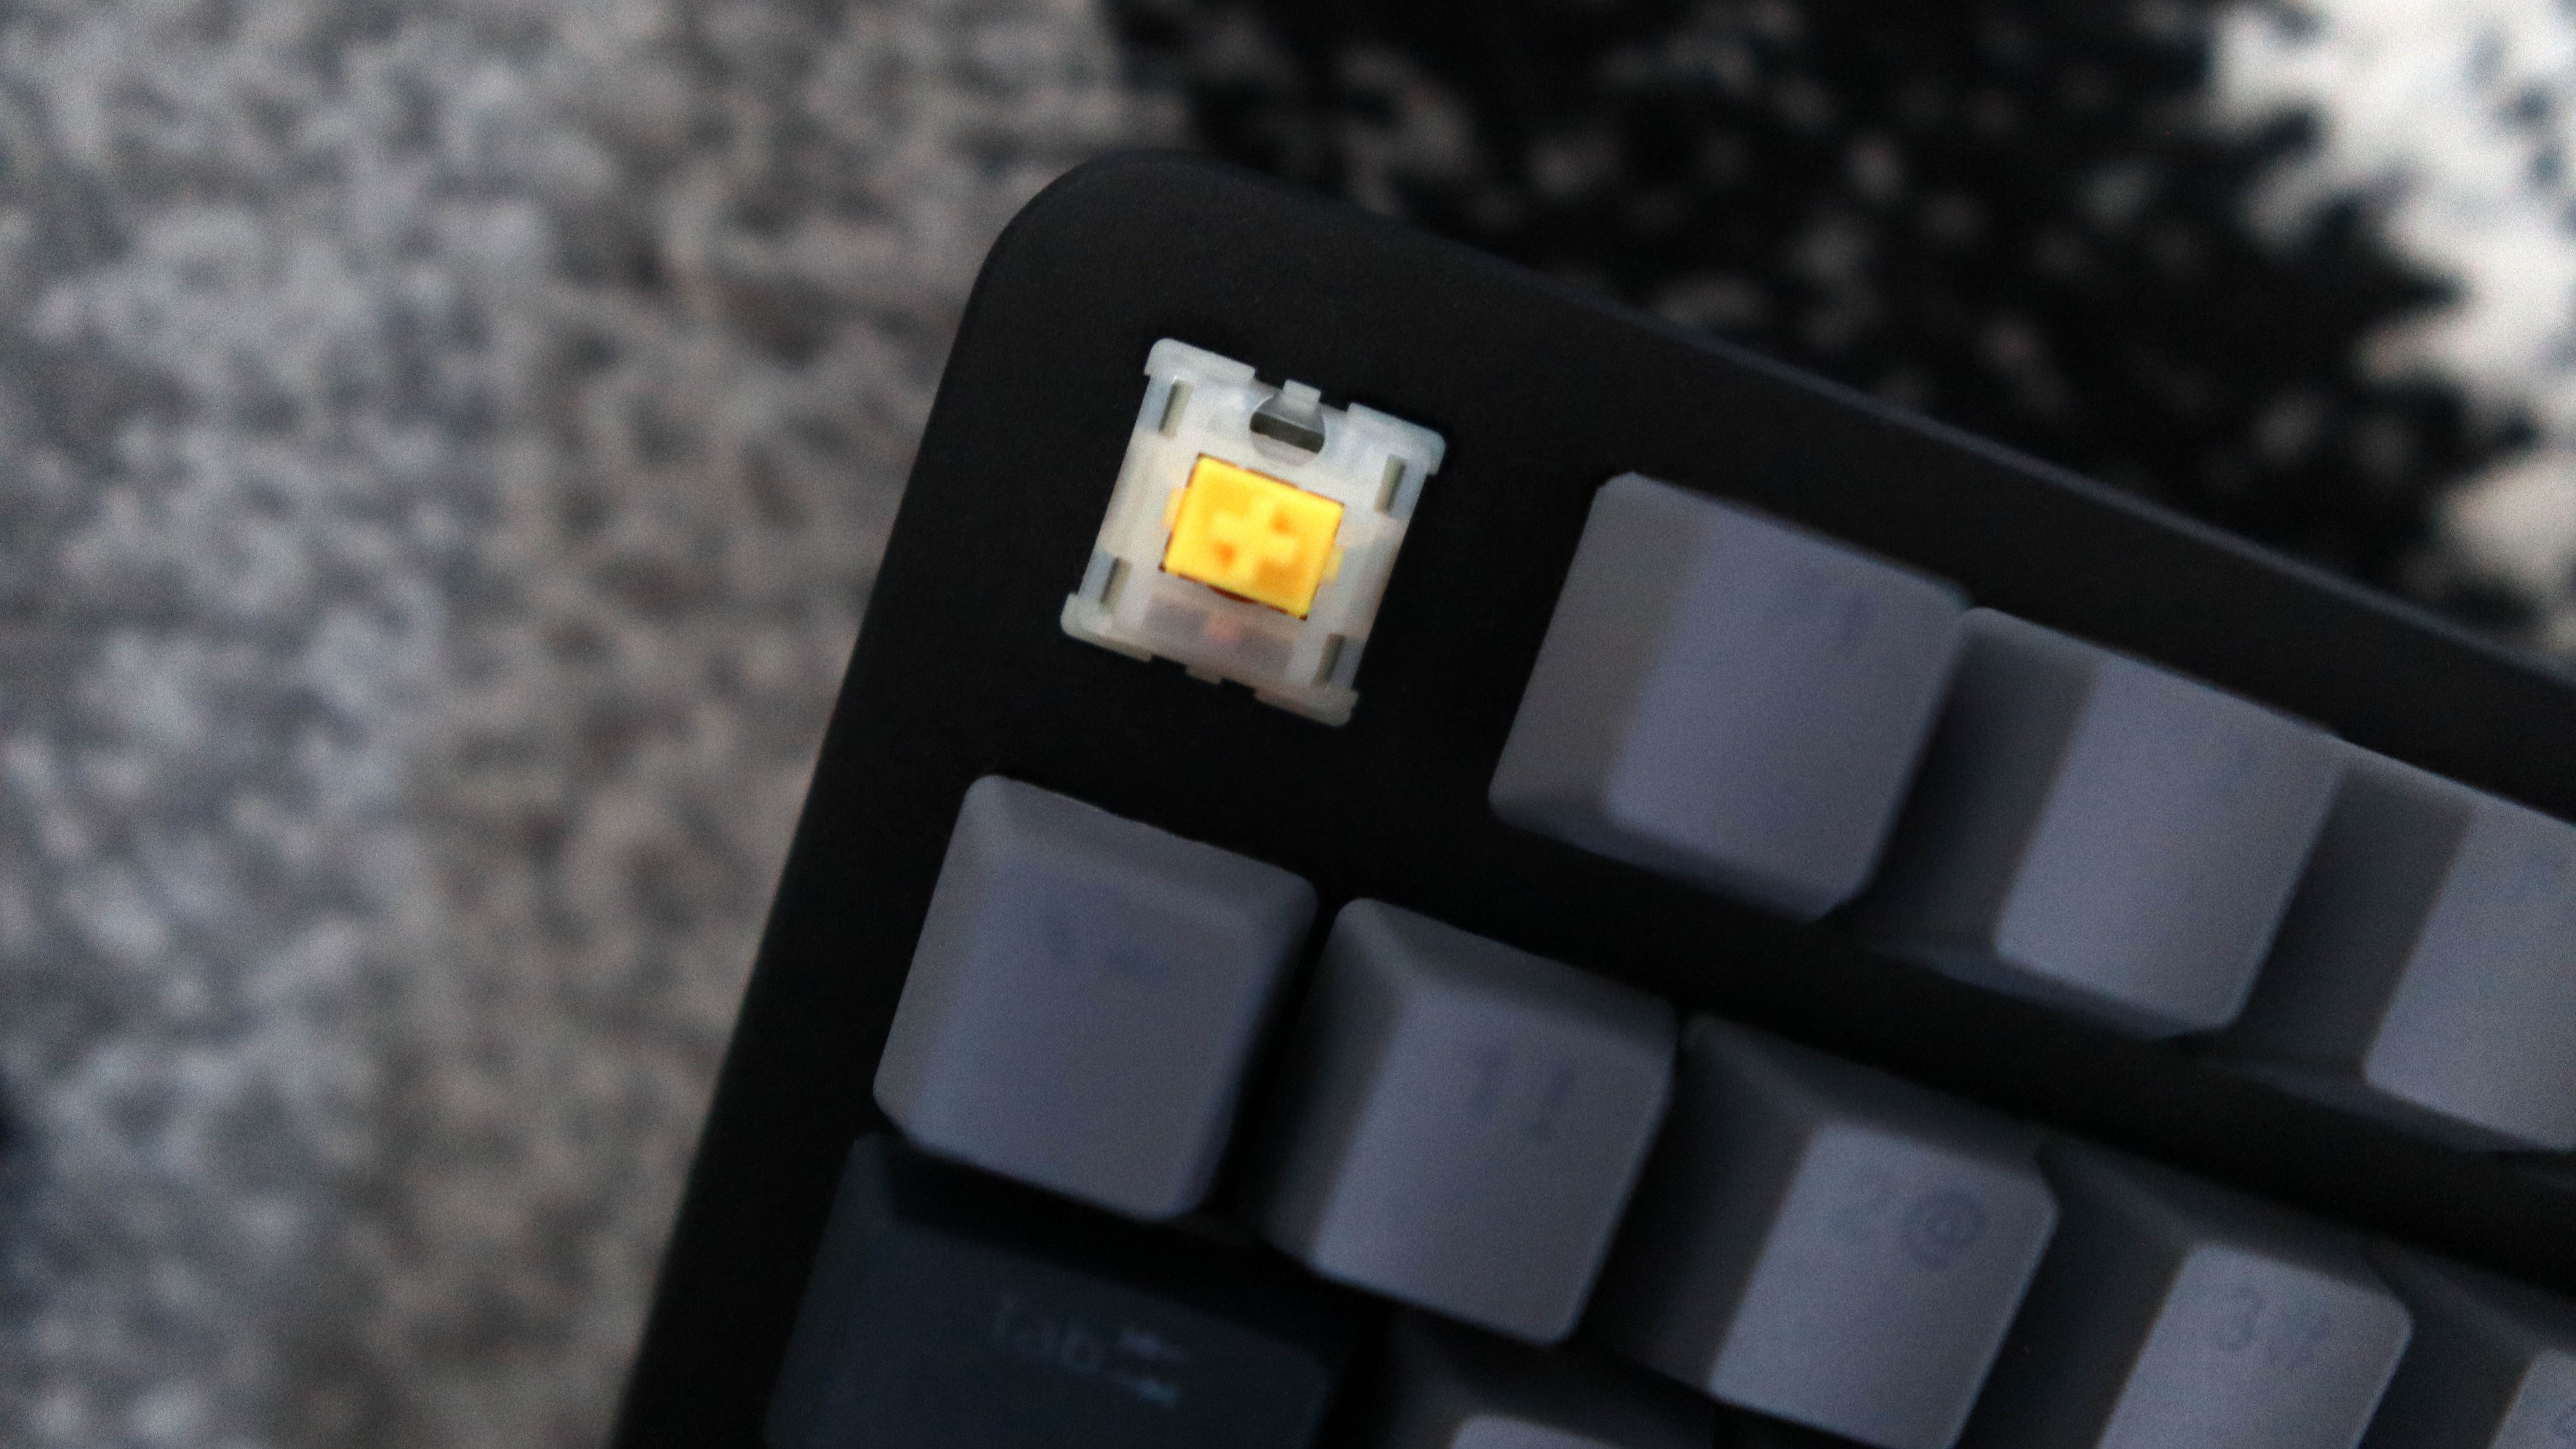 Drop Shift V2 mechanical keyboard with RGB lighting enabled.